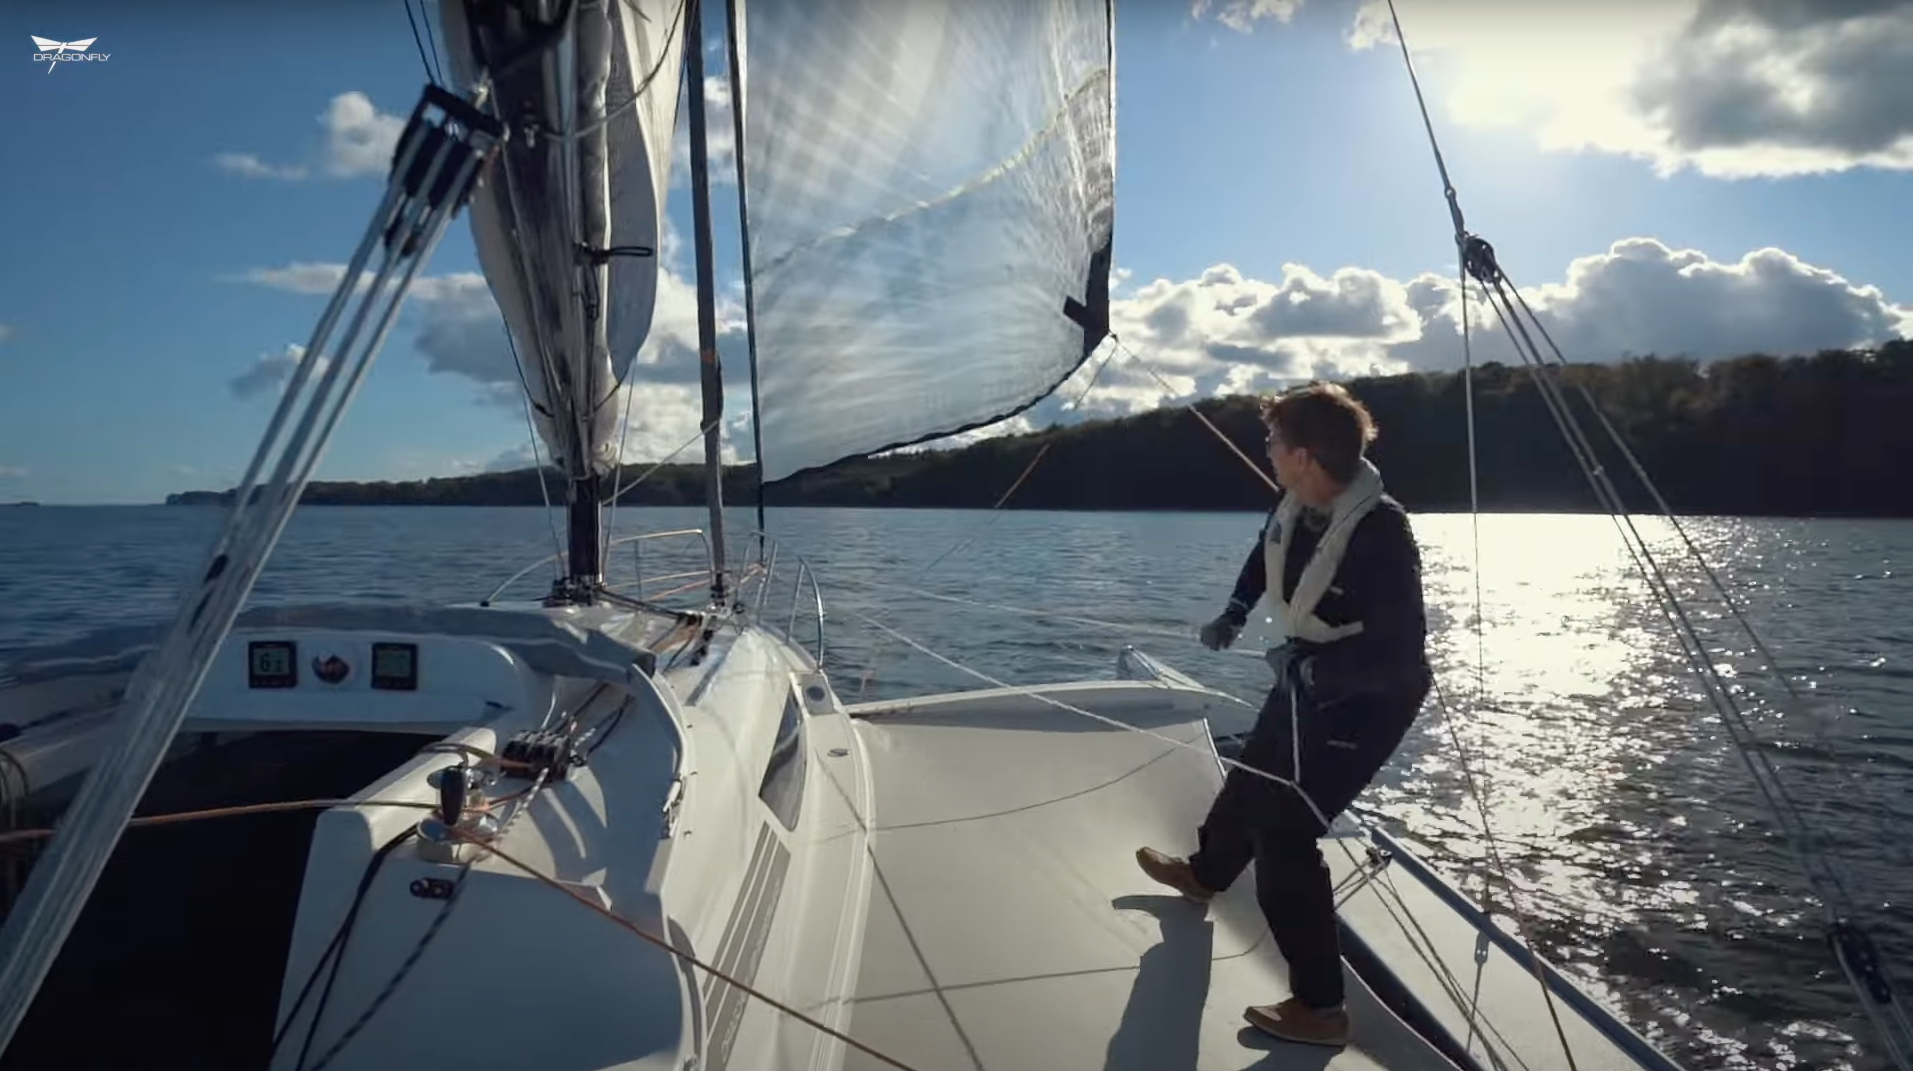 Dragonfly Sail Guide Stronger Wind Conditions